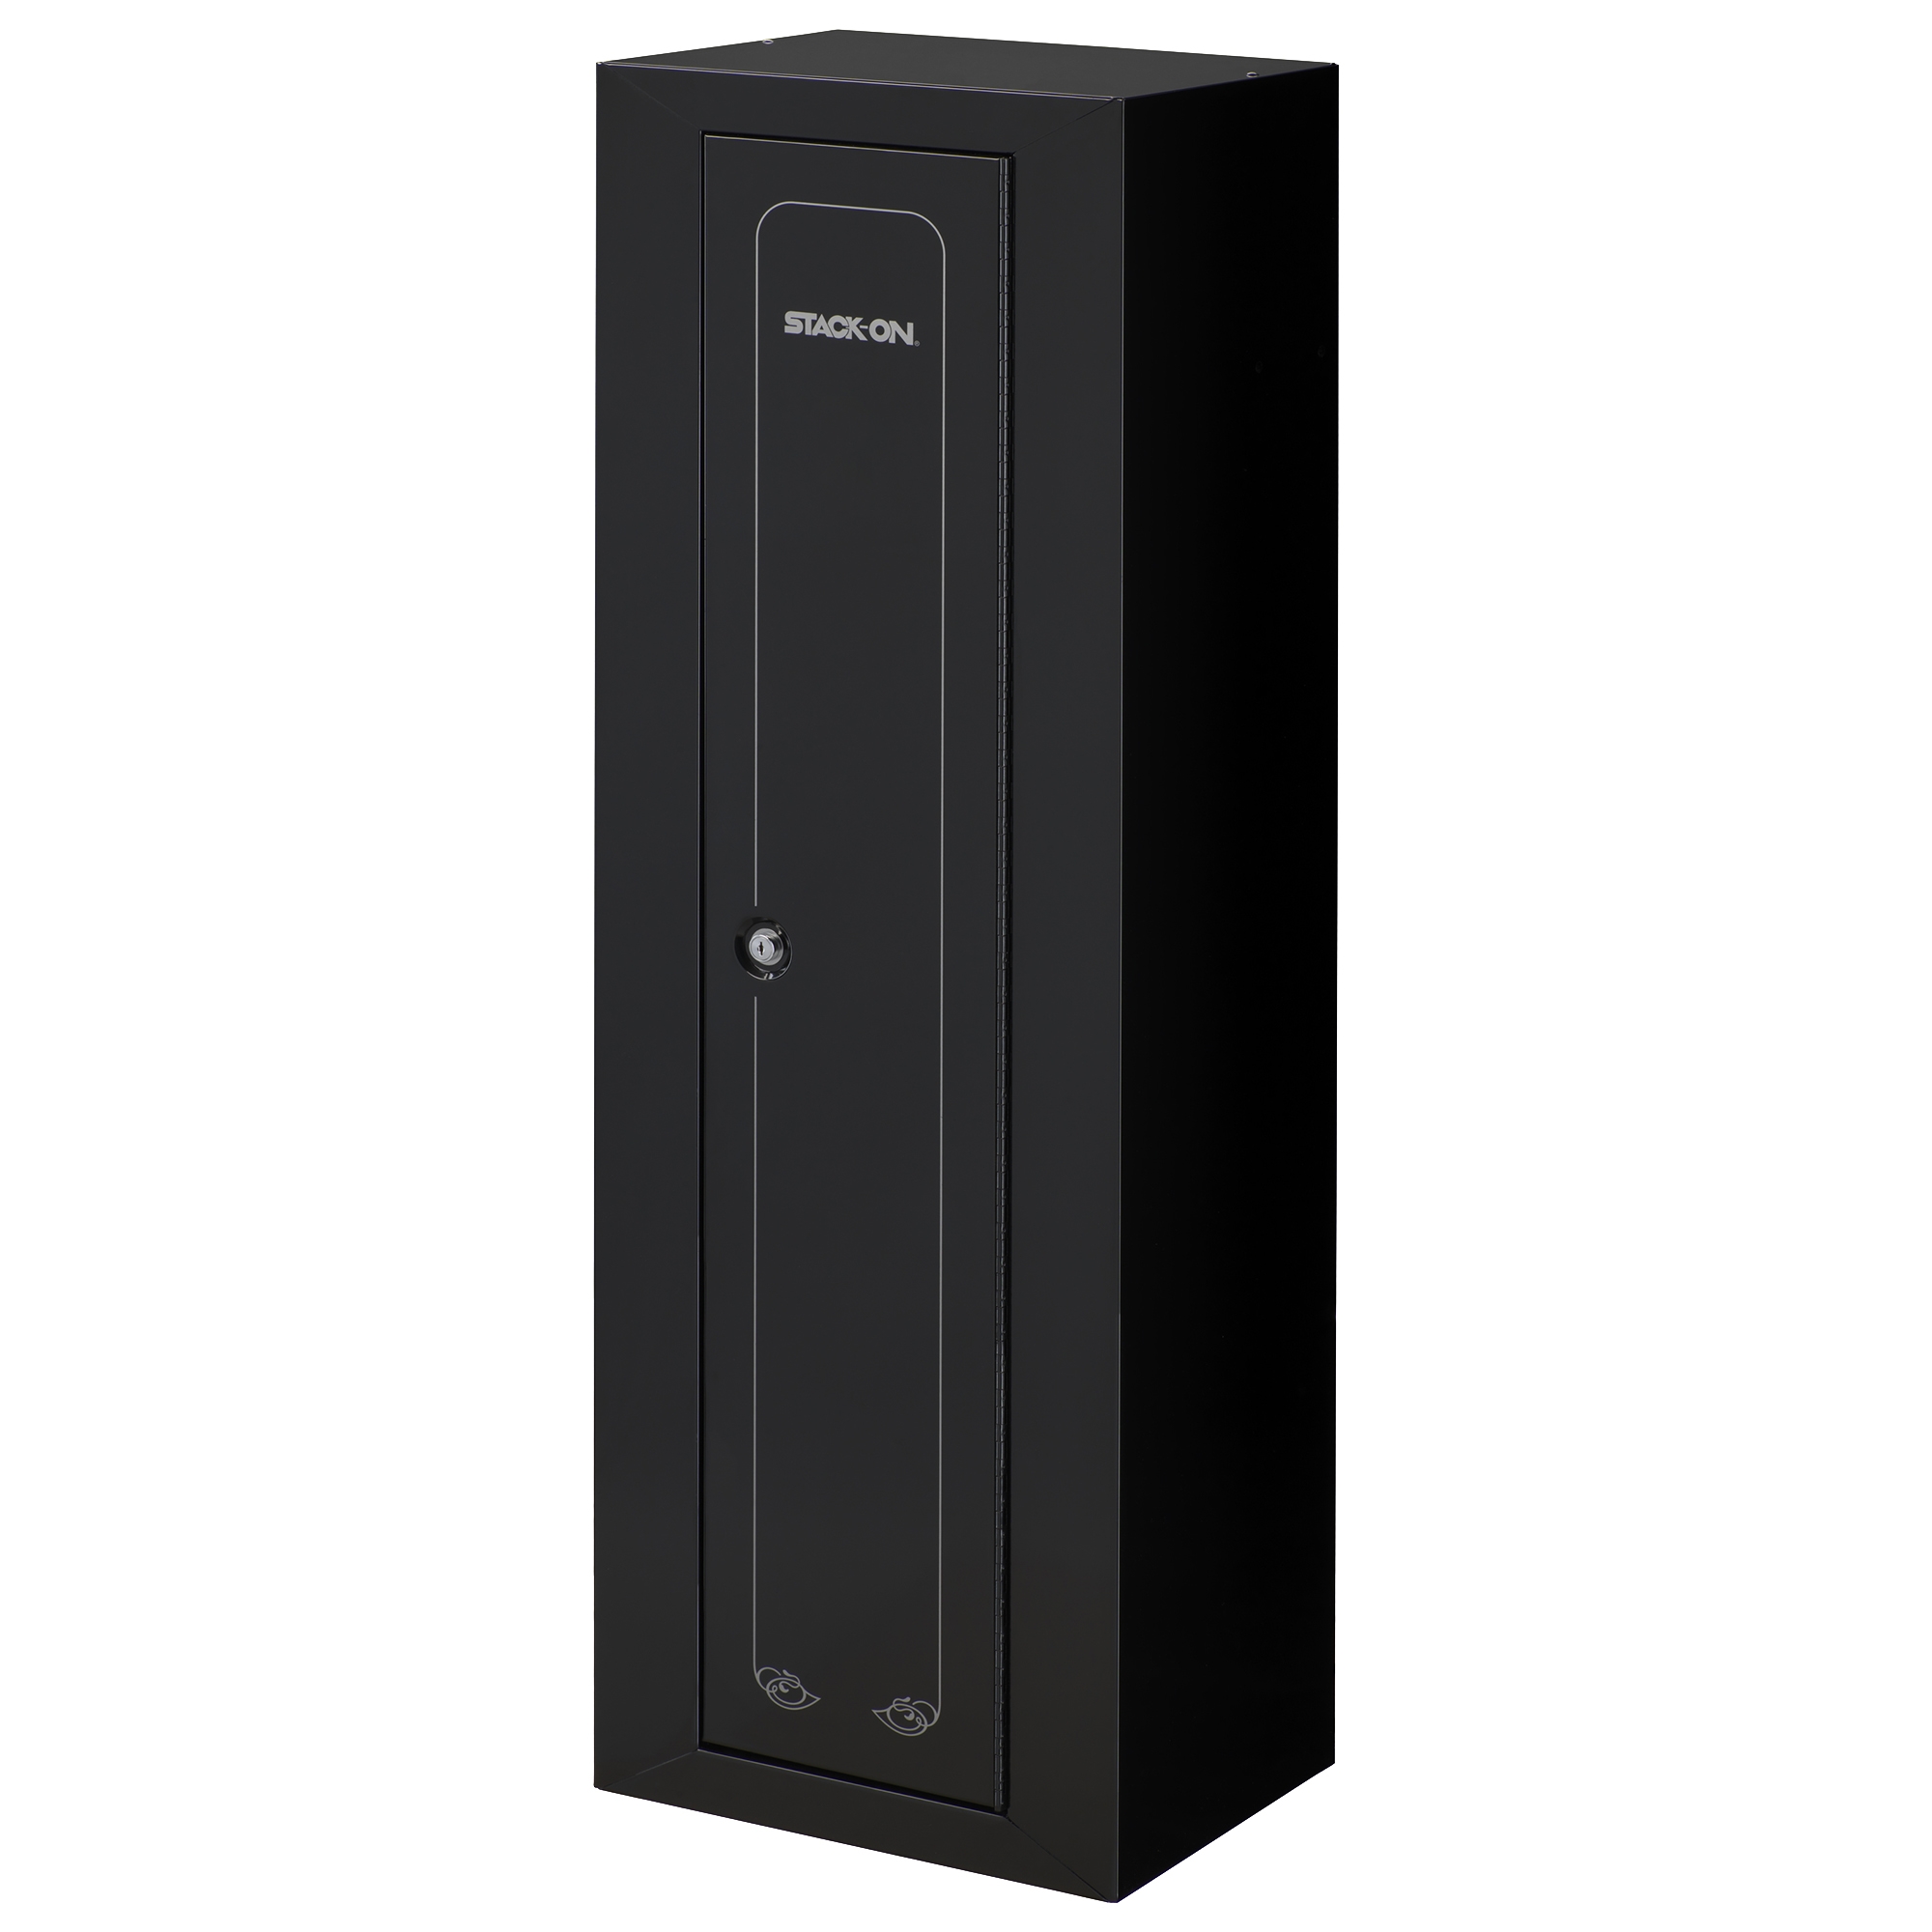 STACK-ON GCB-910 Security Cabinet, Steel, Black, Gloss, Double Bitted Key Lock, 1-Compartment - 3